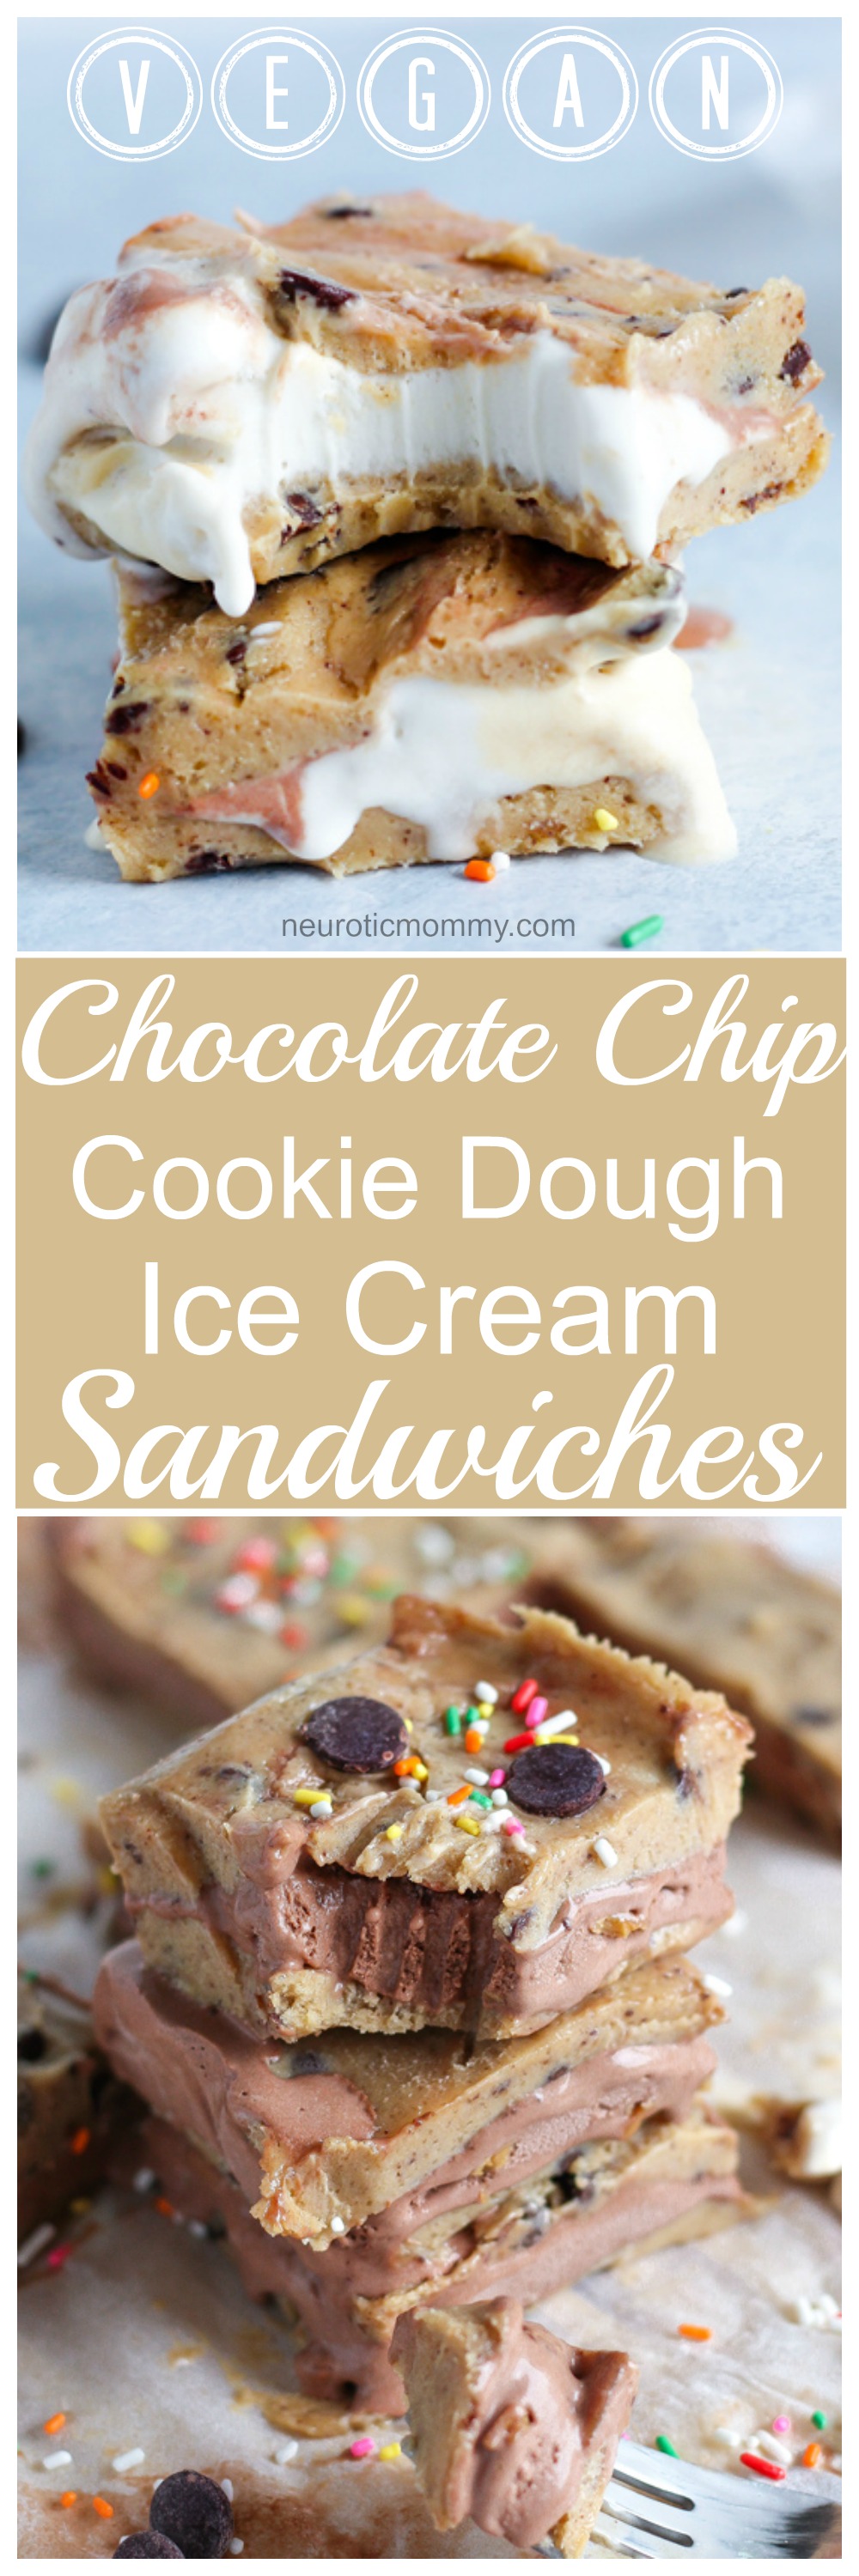 Vegan Chocolate Chip Cookie Dough Ice Cream Sandwiches- The most delicious vegan ice cream bars filled with dairy free rocky road and birthday cake! NeuroticMommy.com #vegan #desserts #snacks